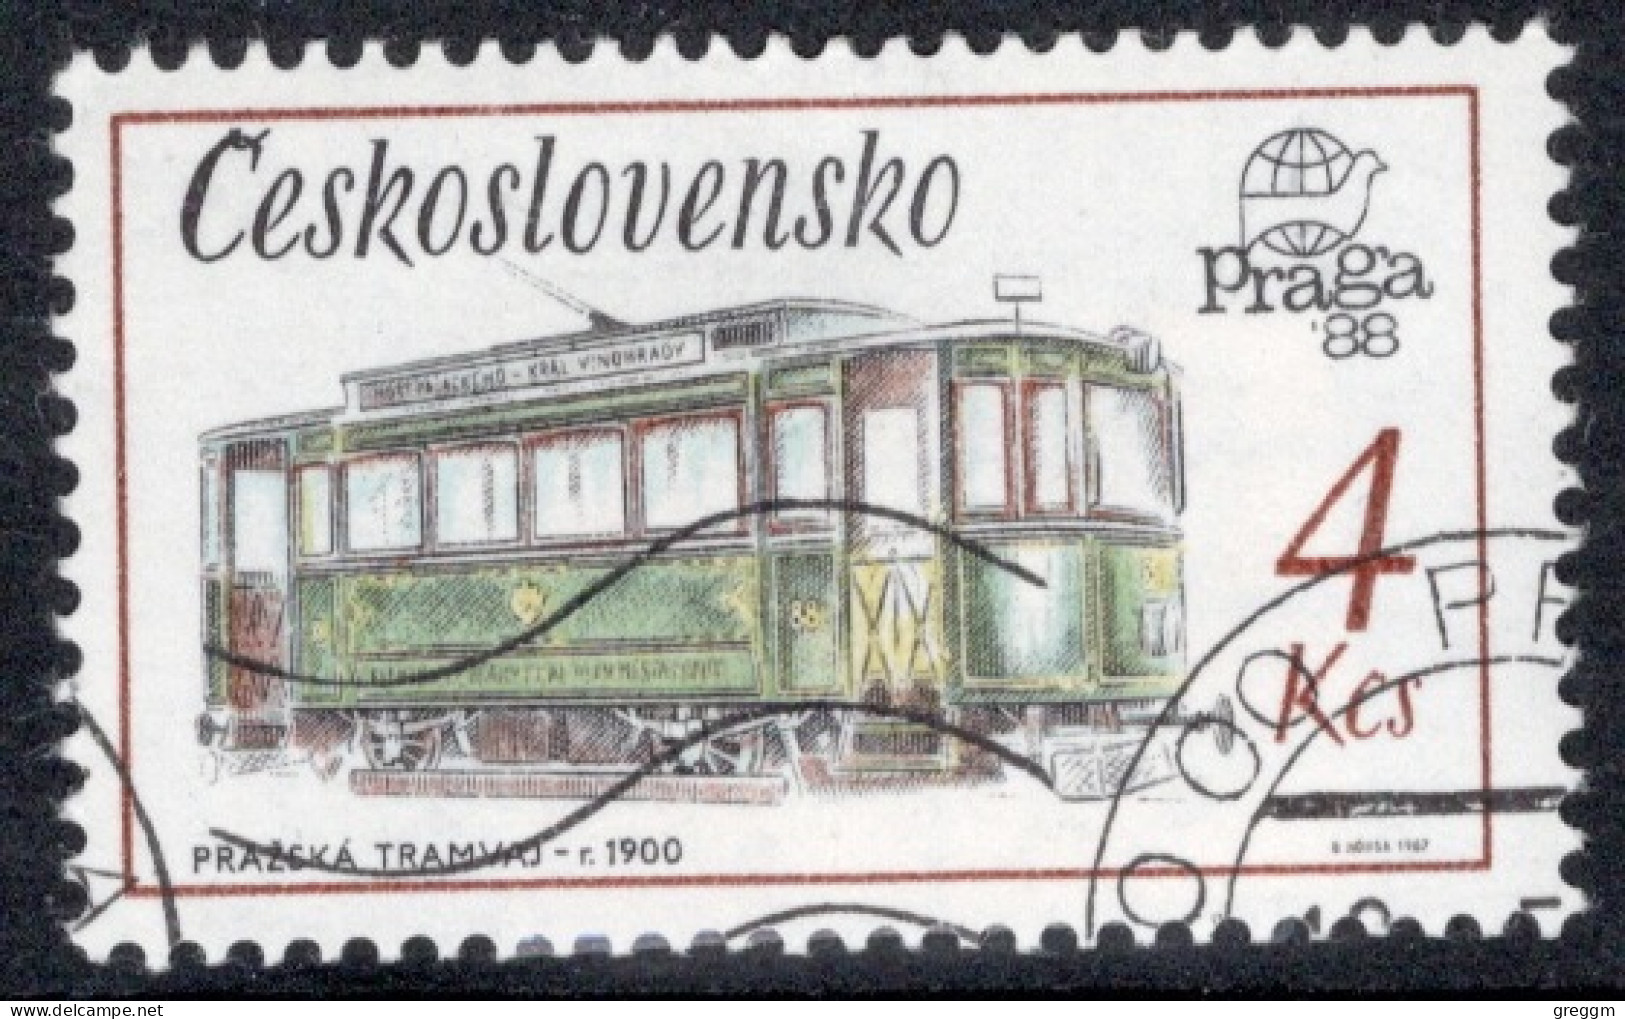 Czechoslovakia 1987 Single Stamp To Celebrate Praga 88 International Stamp Exhibition - Technical Monuments In Fine Used - Used Stamps